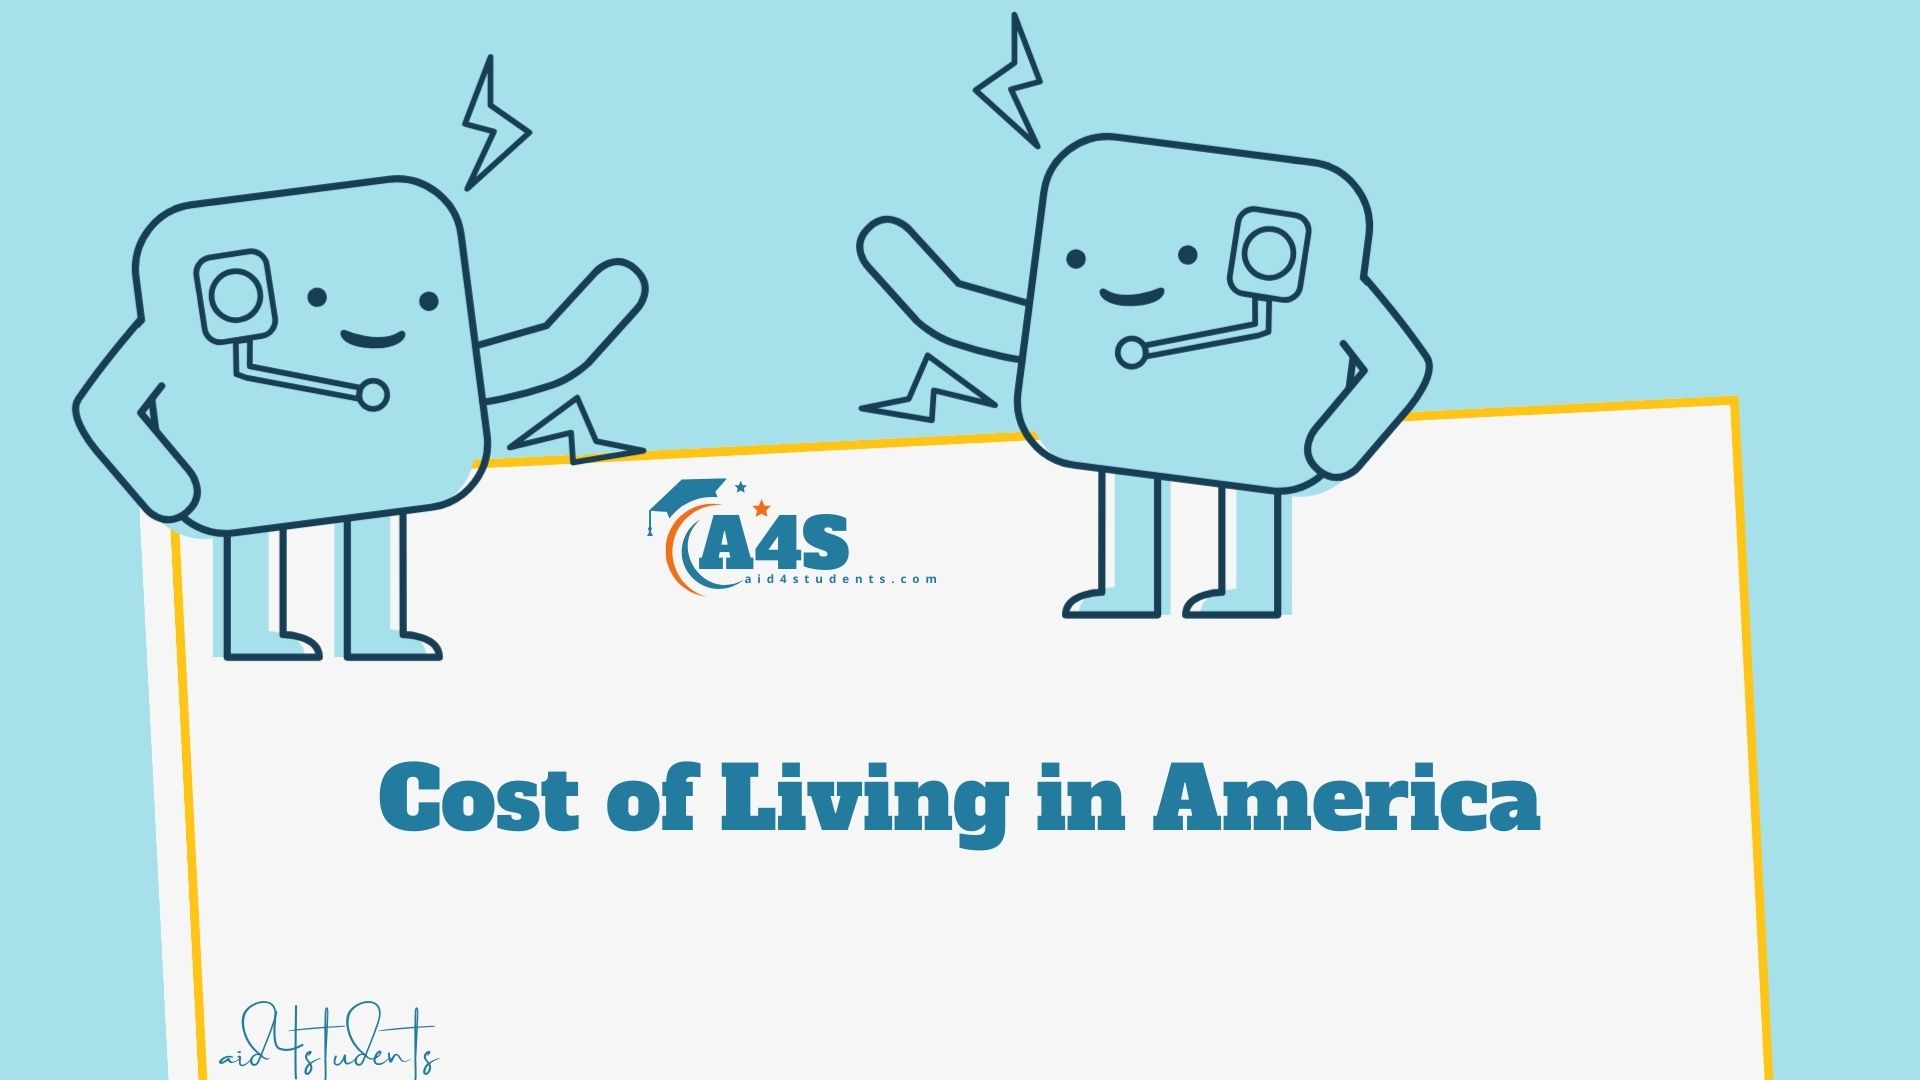 Cost of Living in America